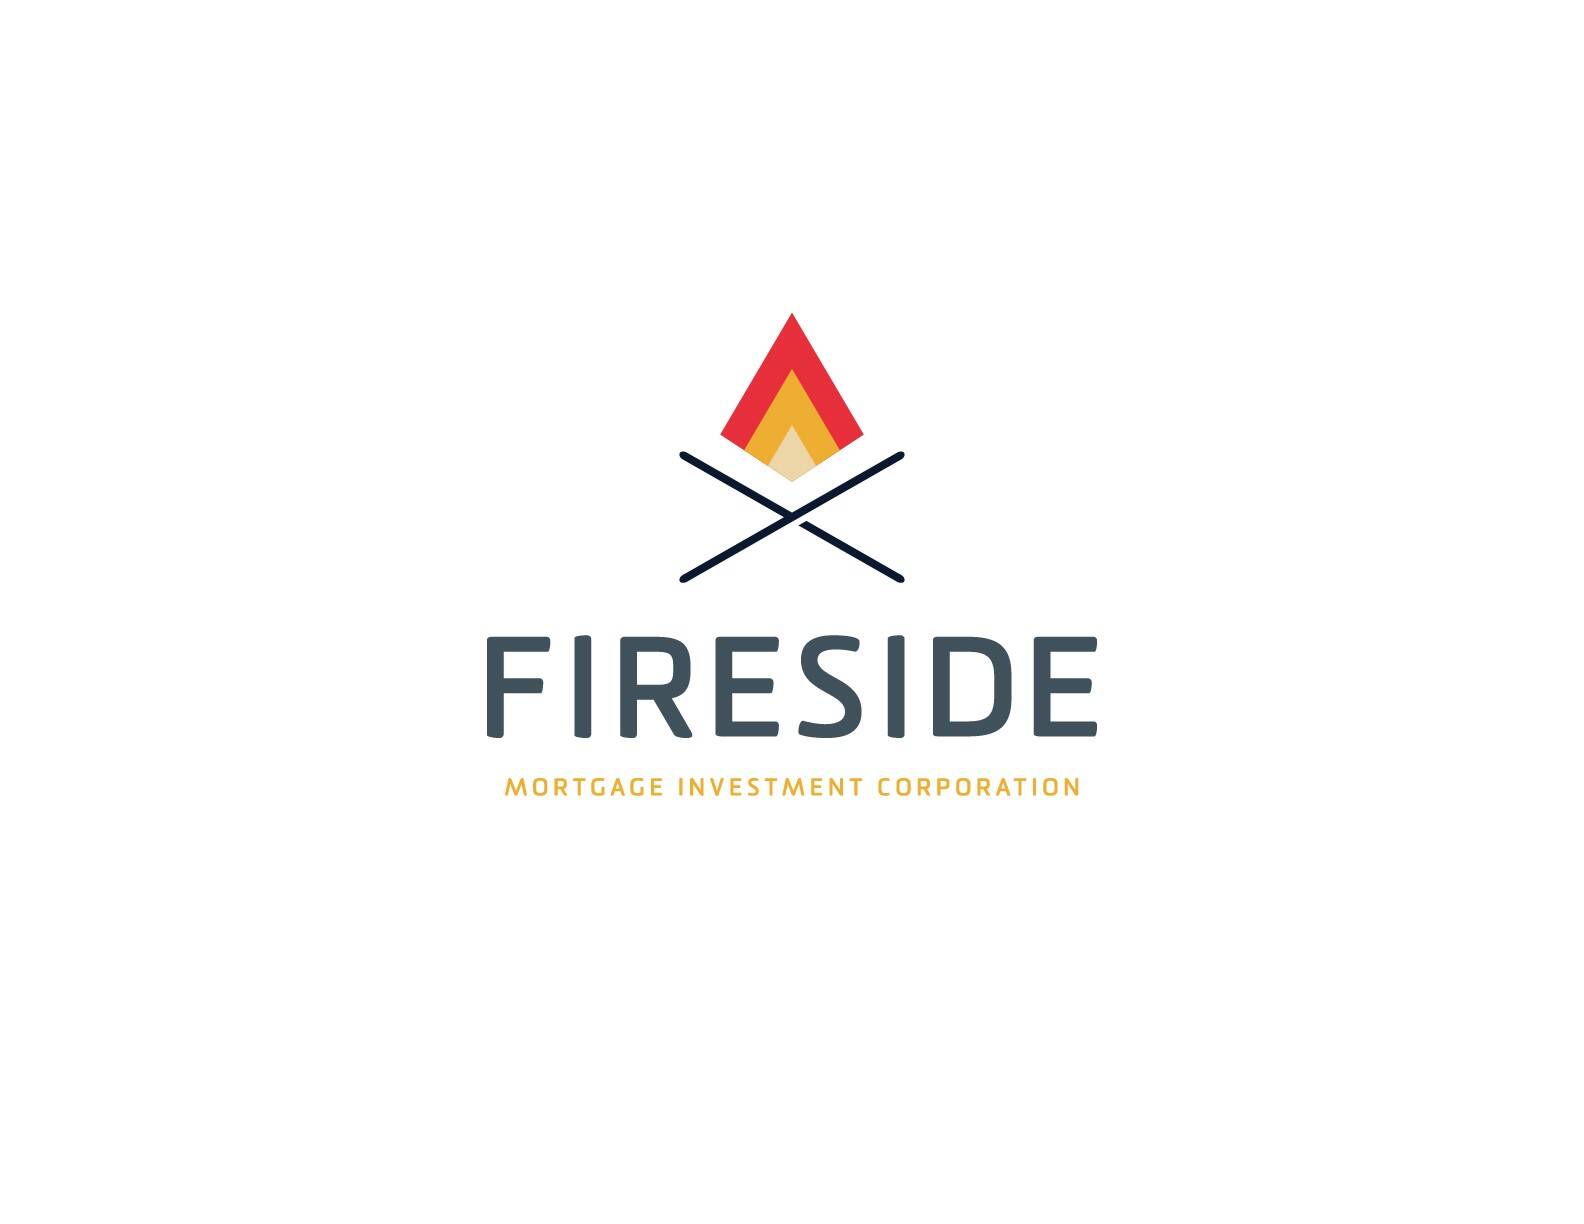 Fireside Mortgage Investment Corporation